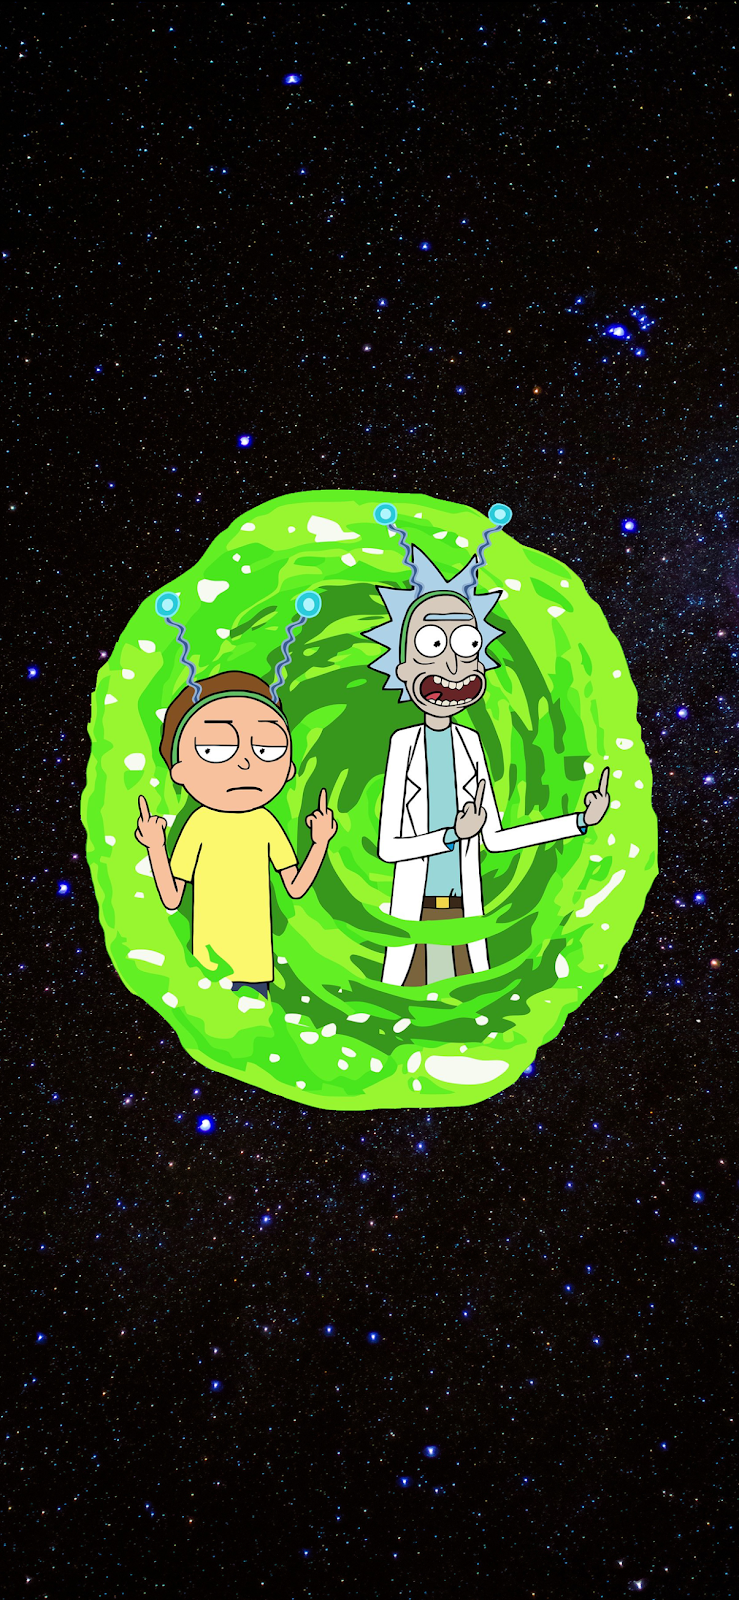 Rick and Morty phone wallpaper collection 154. Rick and morty poster, Rick and morty drawing, Rick and morty characters